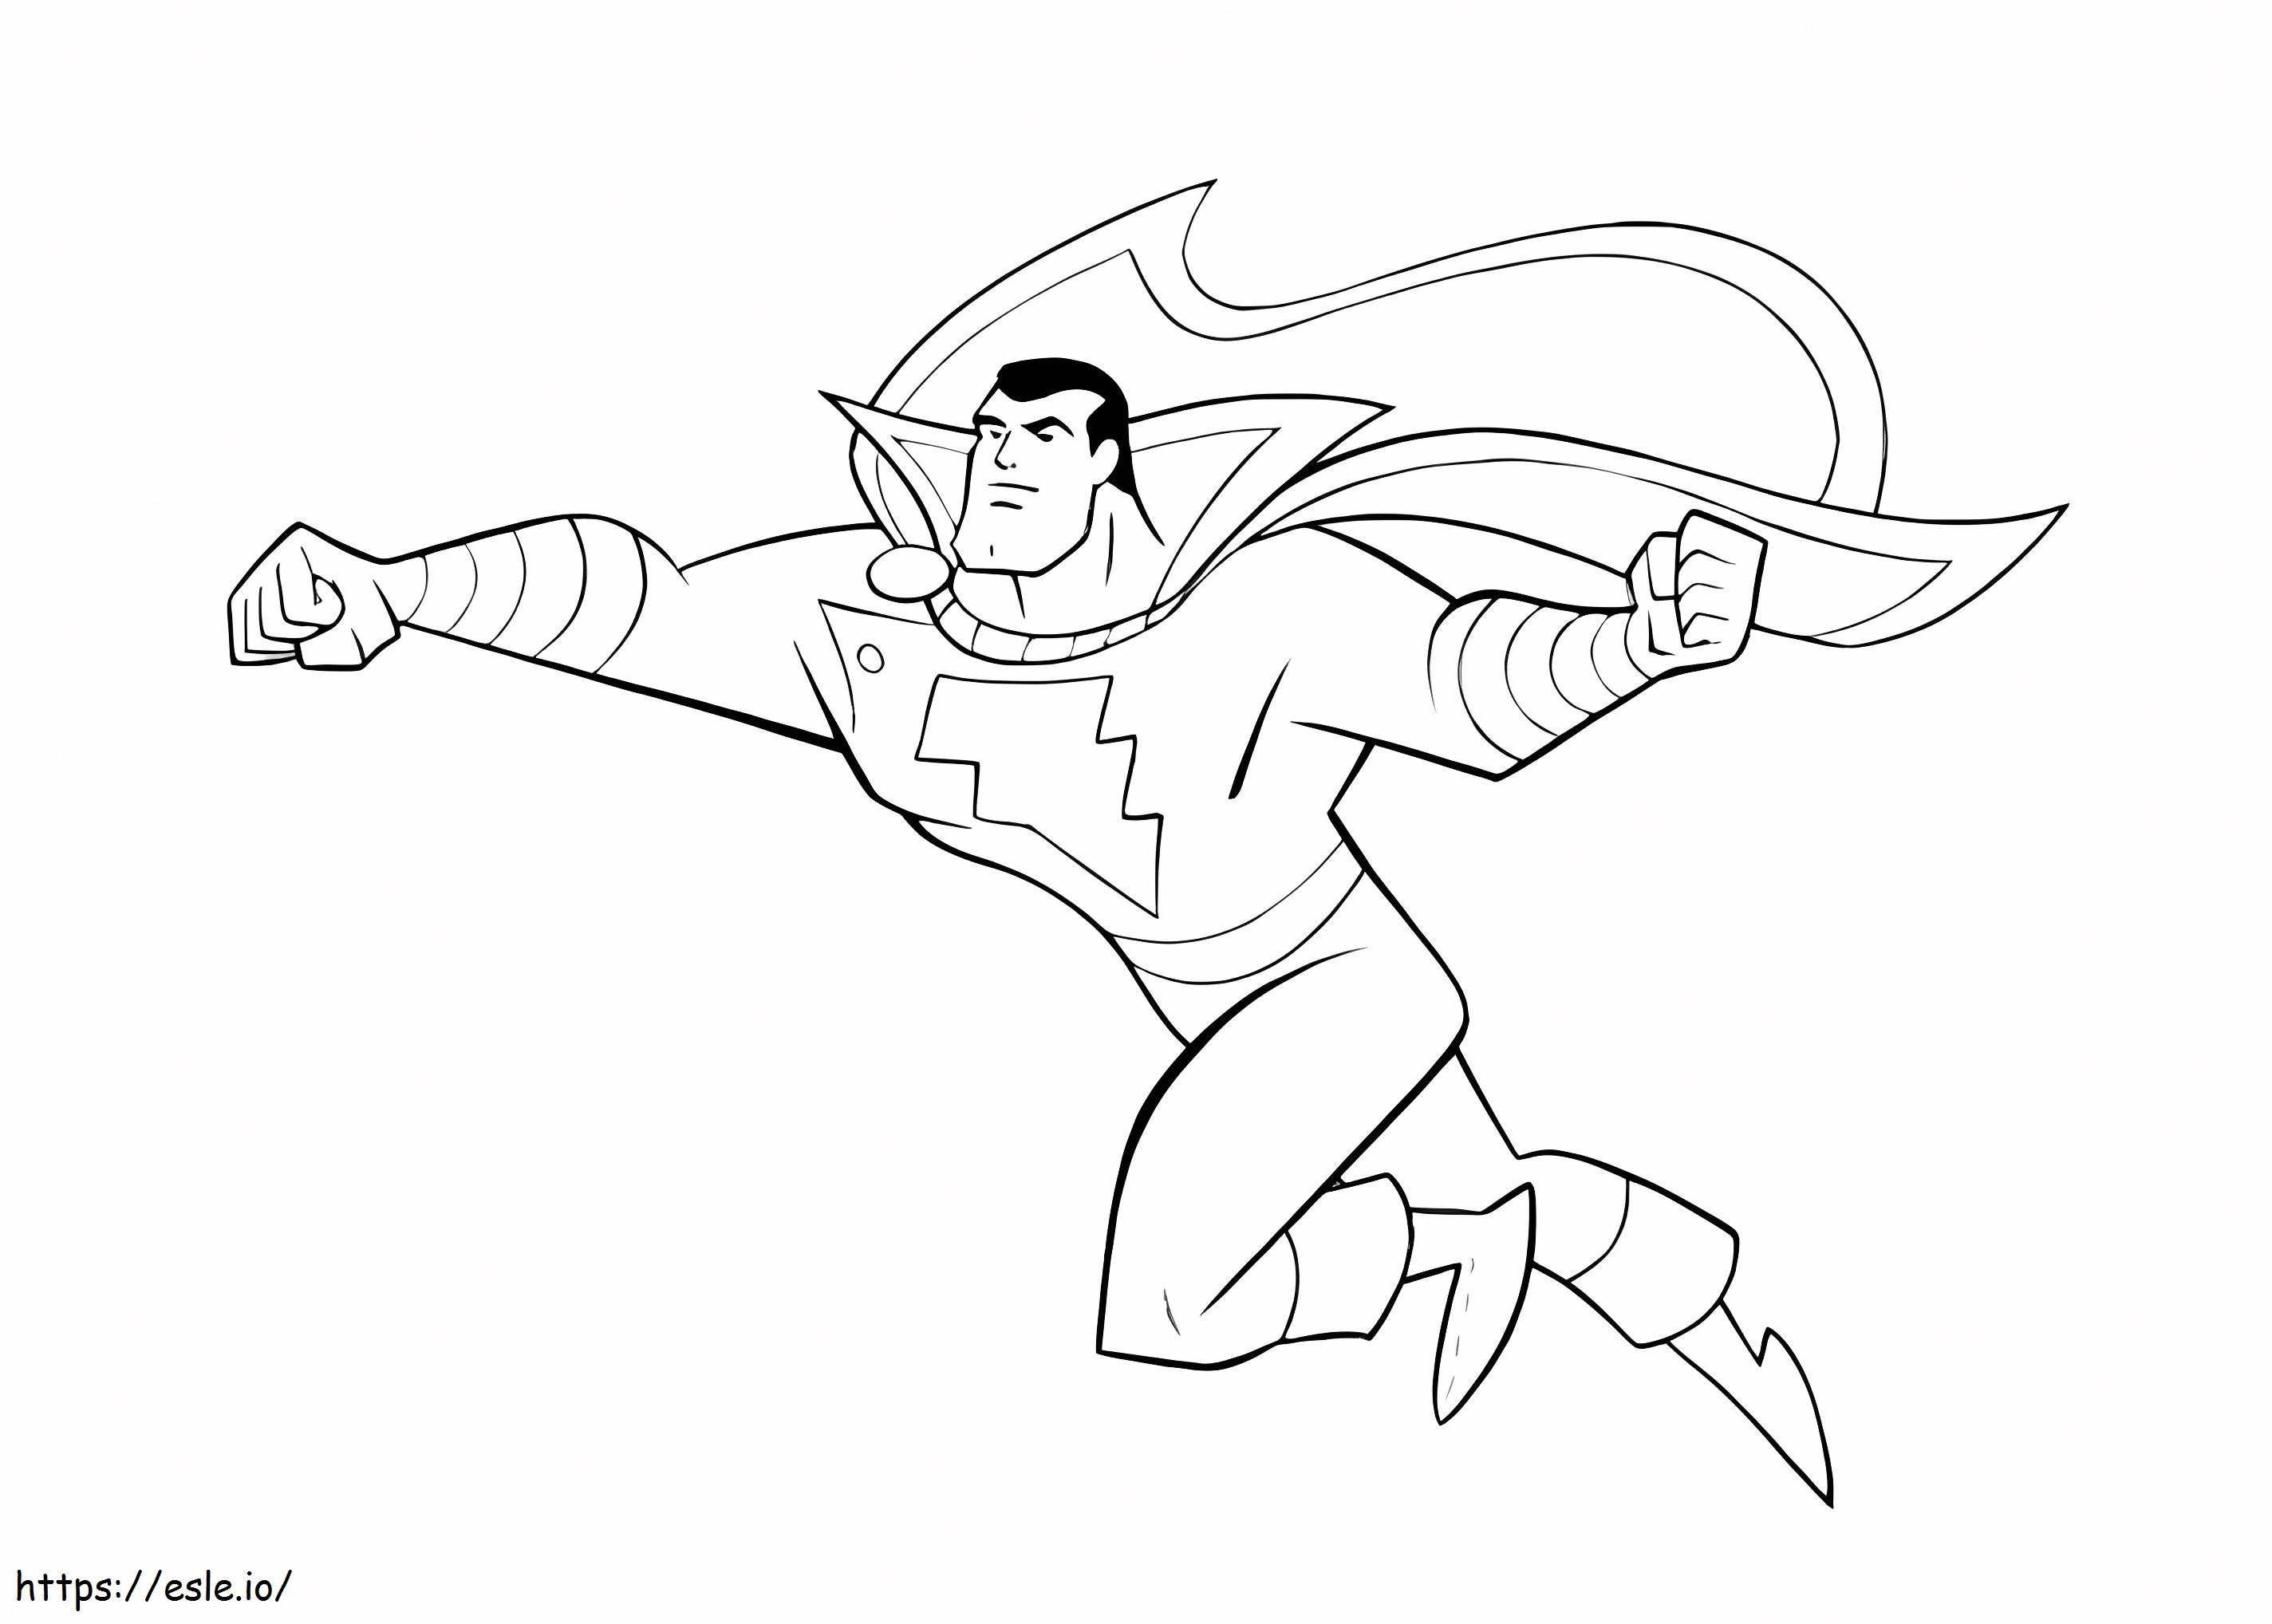 Smiling Shazam Punch coloring page